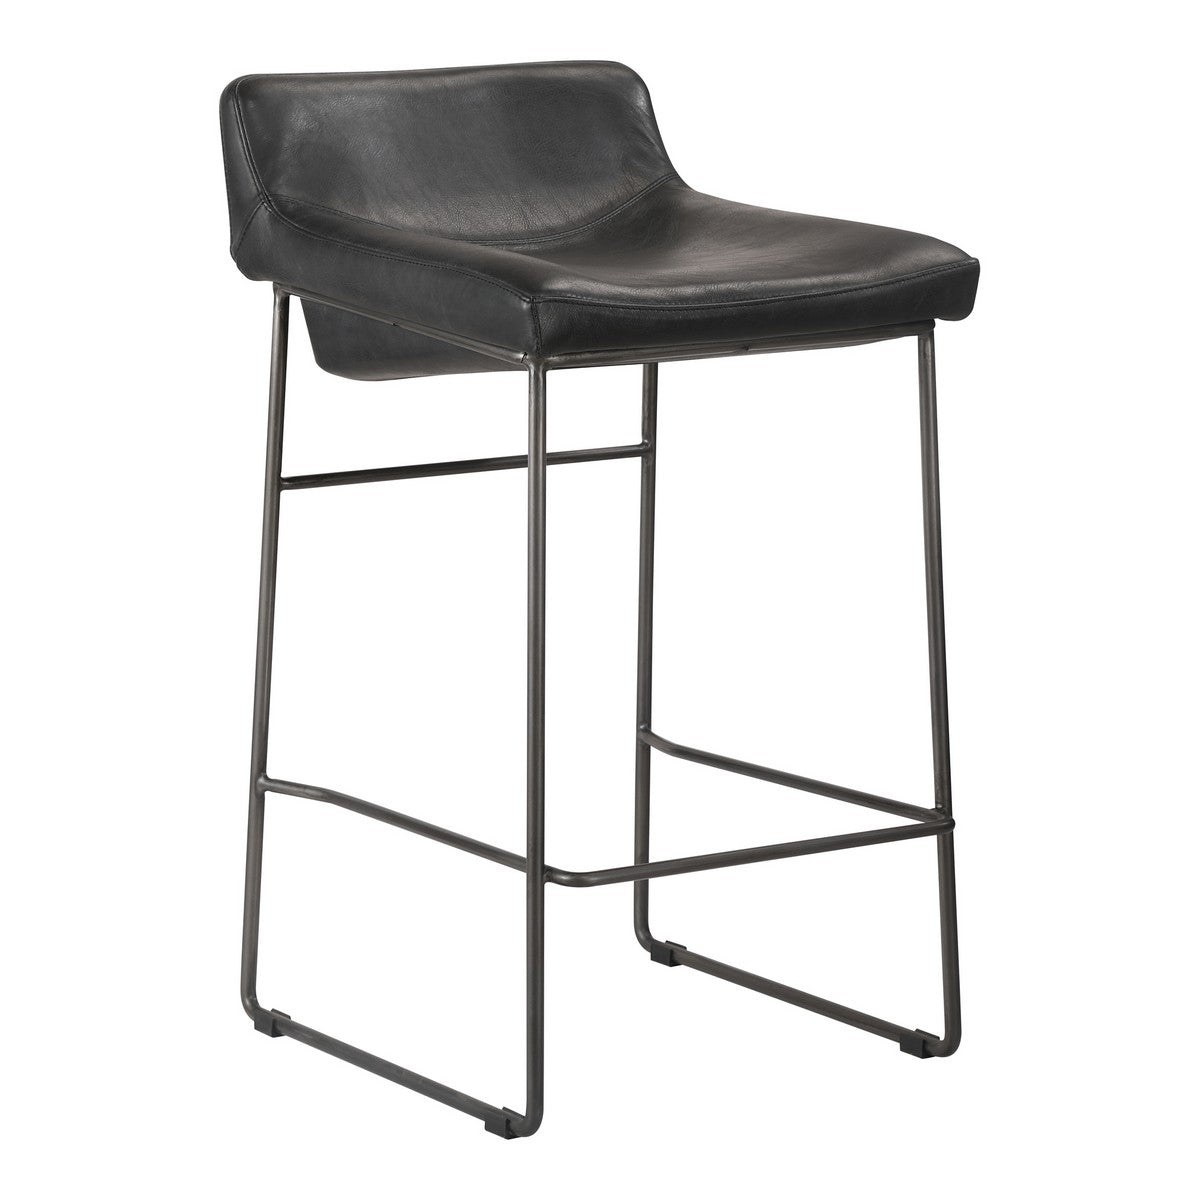 Moe's Home Collection Starlet Counter Stool Black-Set of Two - PK-1106-02